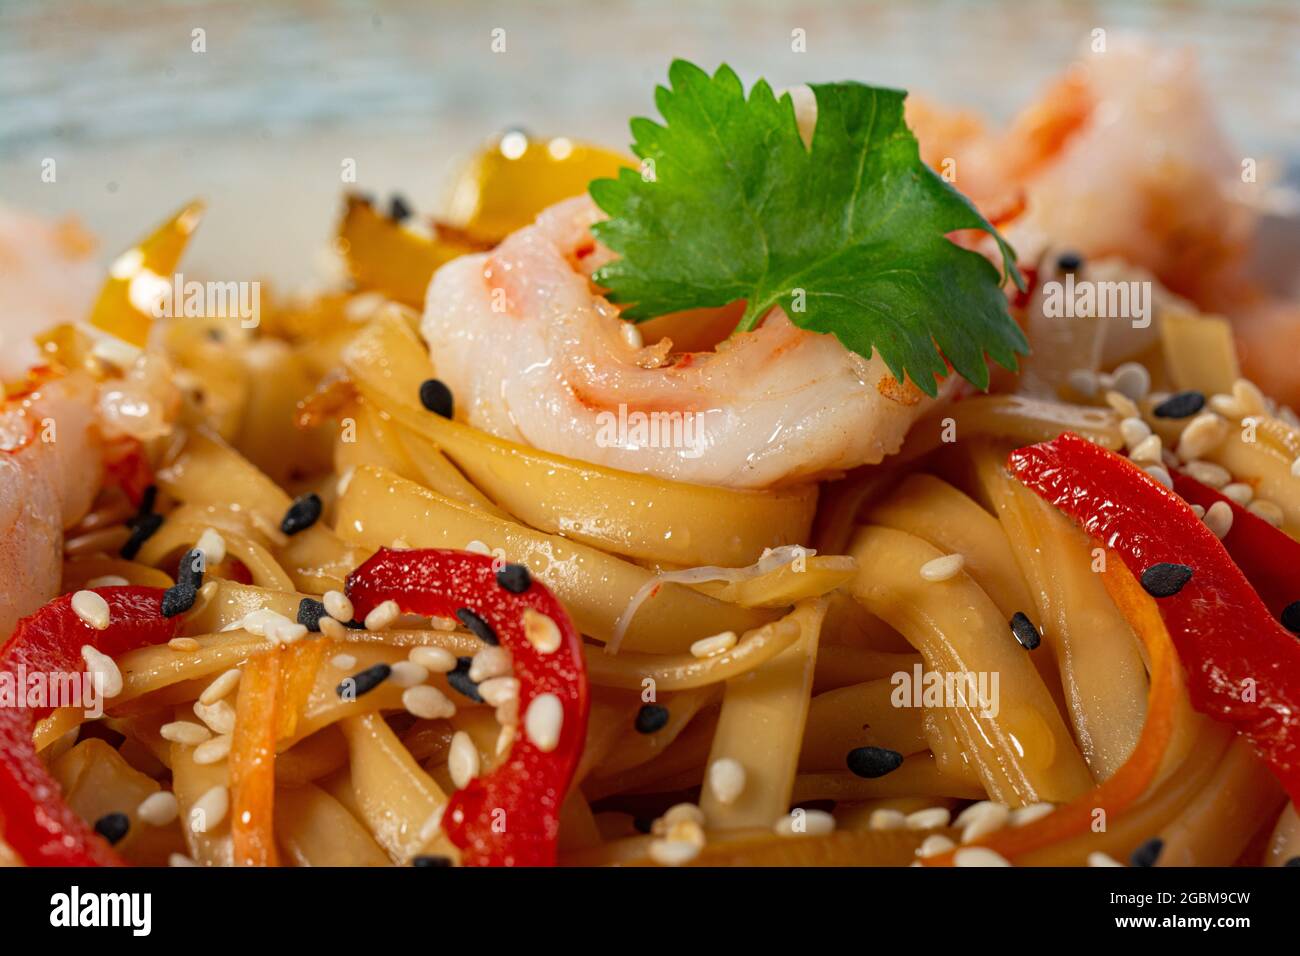 Udon noodles with fried shrimp, red onion and bell pepper, garnished with cilantro and sesame seeds. Traditional Asian cuisine. Stock Photo